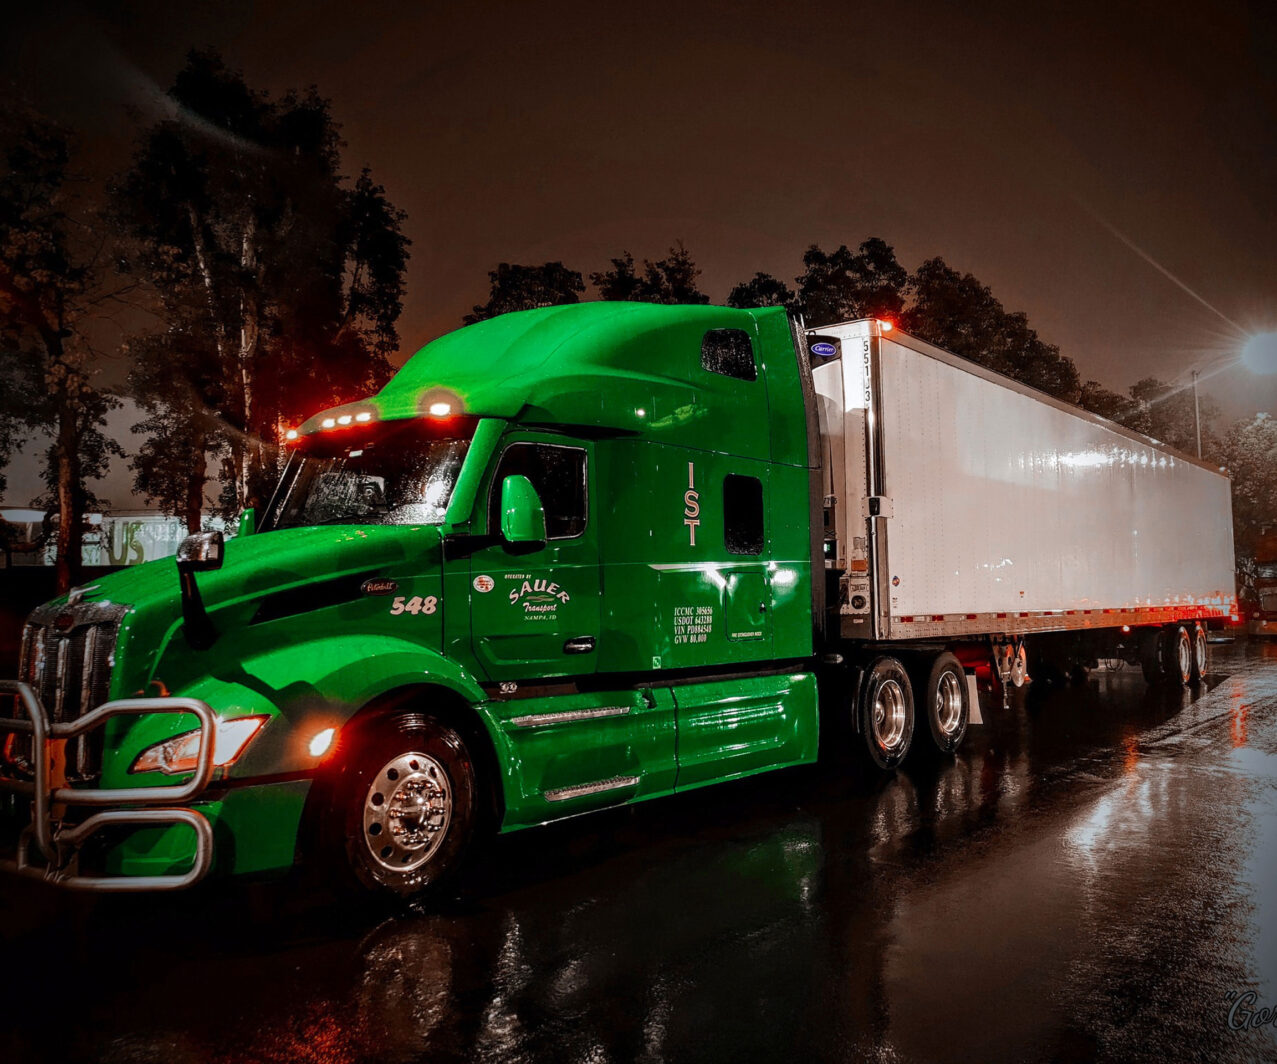 A green semi freight truck pulling a white trailer at night